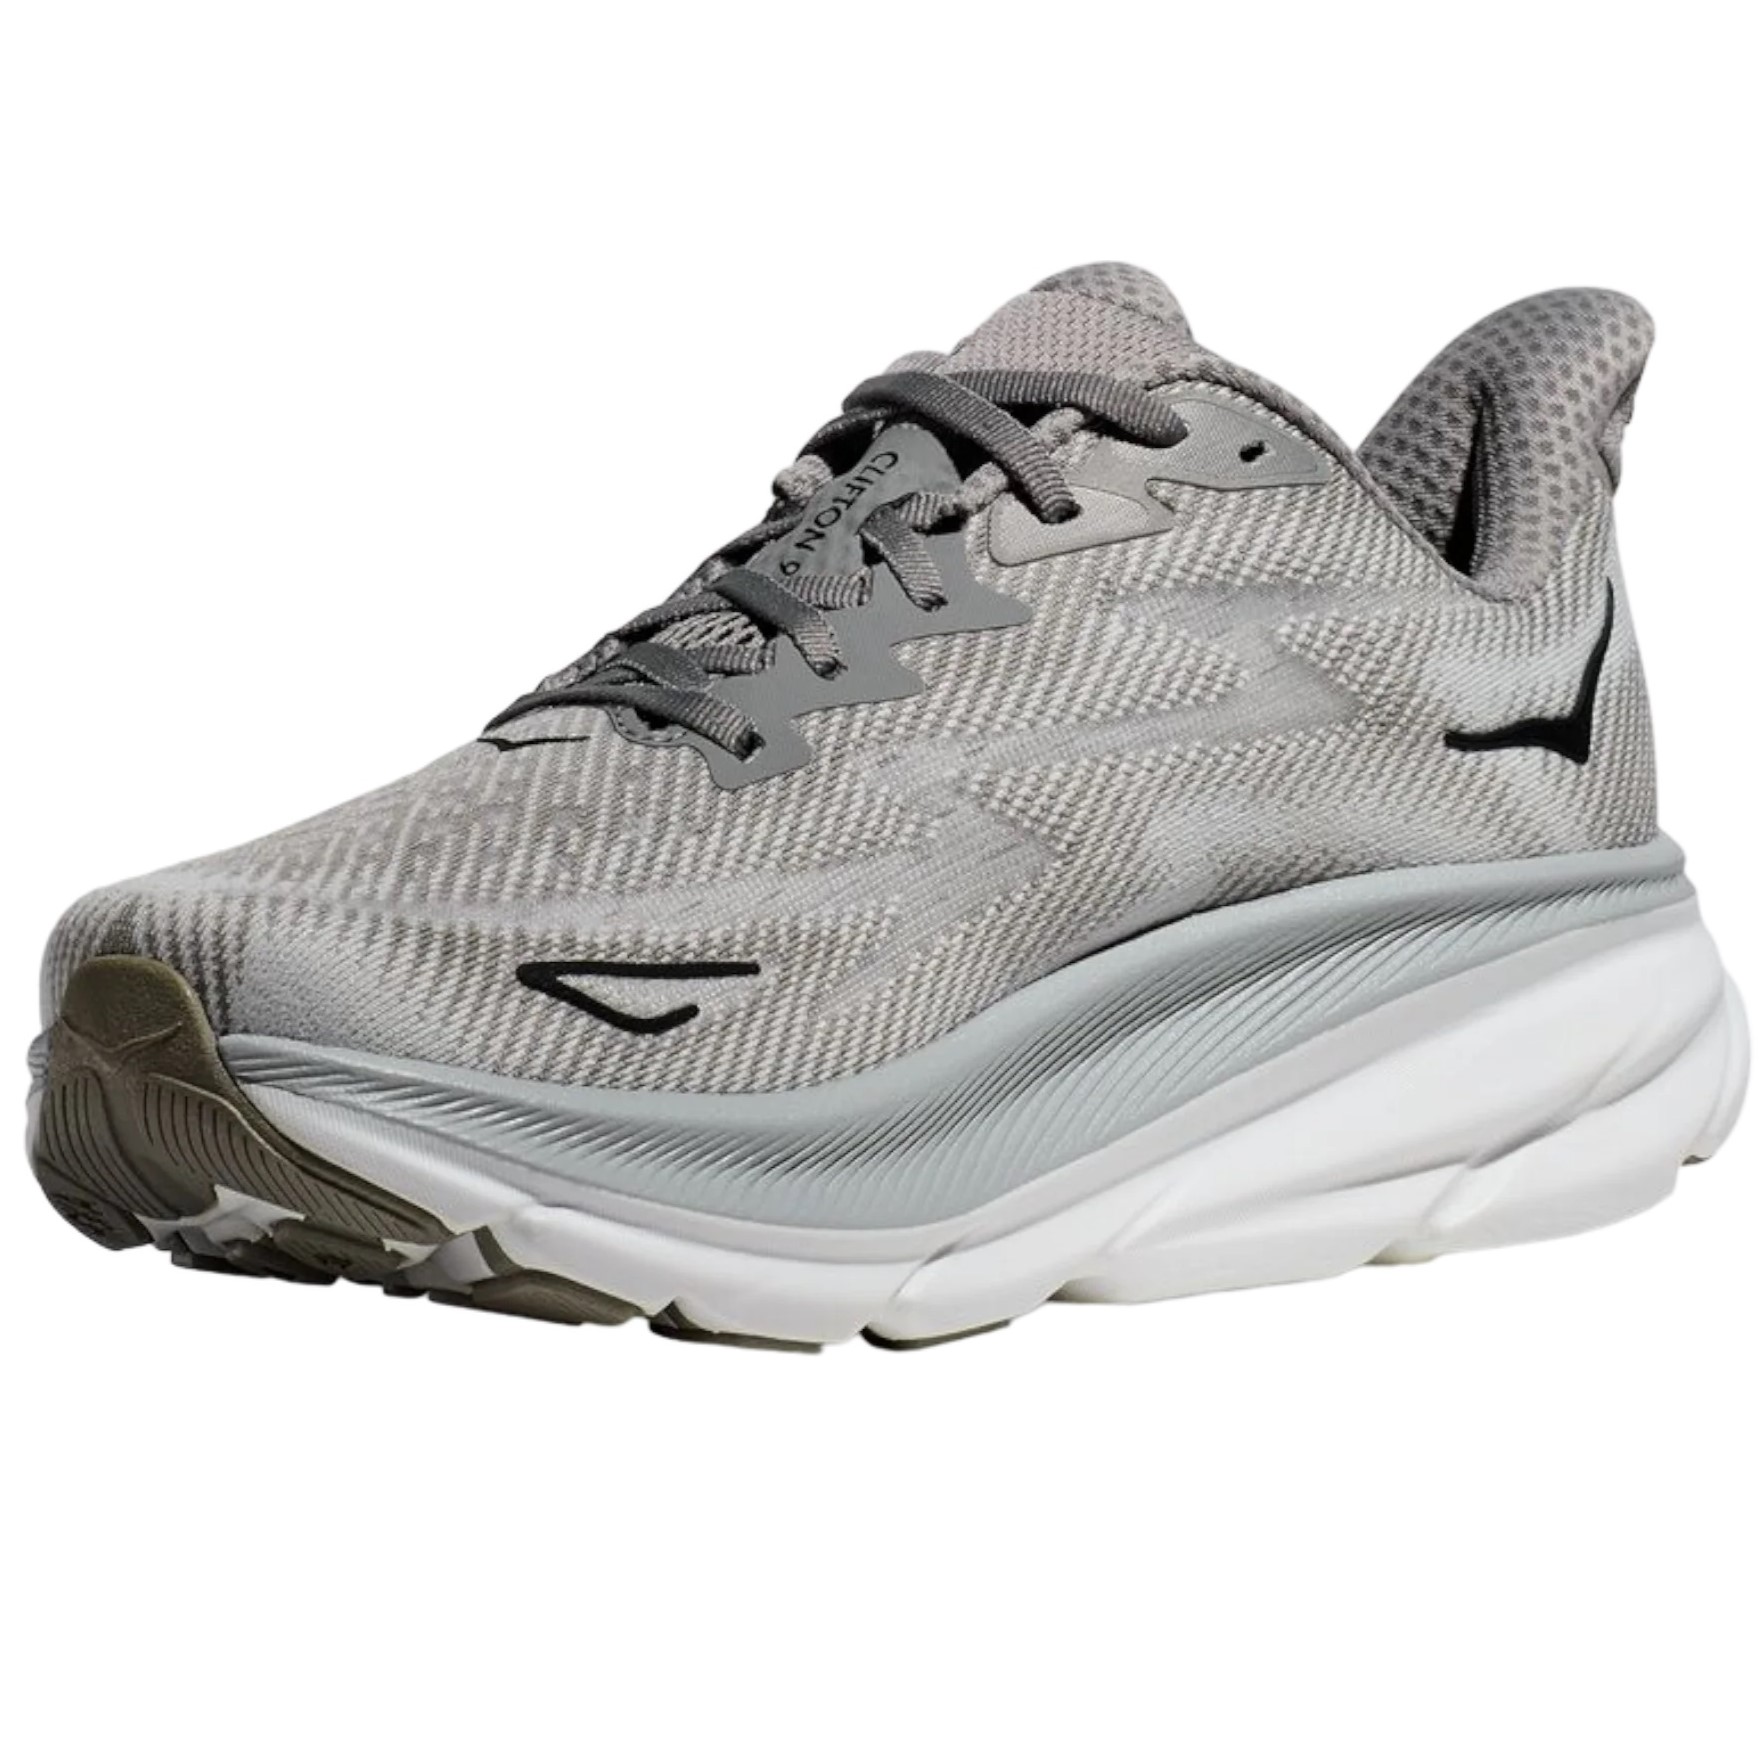 GIÀY THỂ THAO HOKA NAM HARBOR MIST CLIFTON 9 WIDE EVERYDAY RUNNING SHOES 196565186485 2